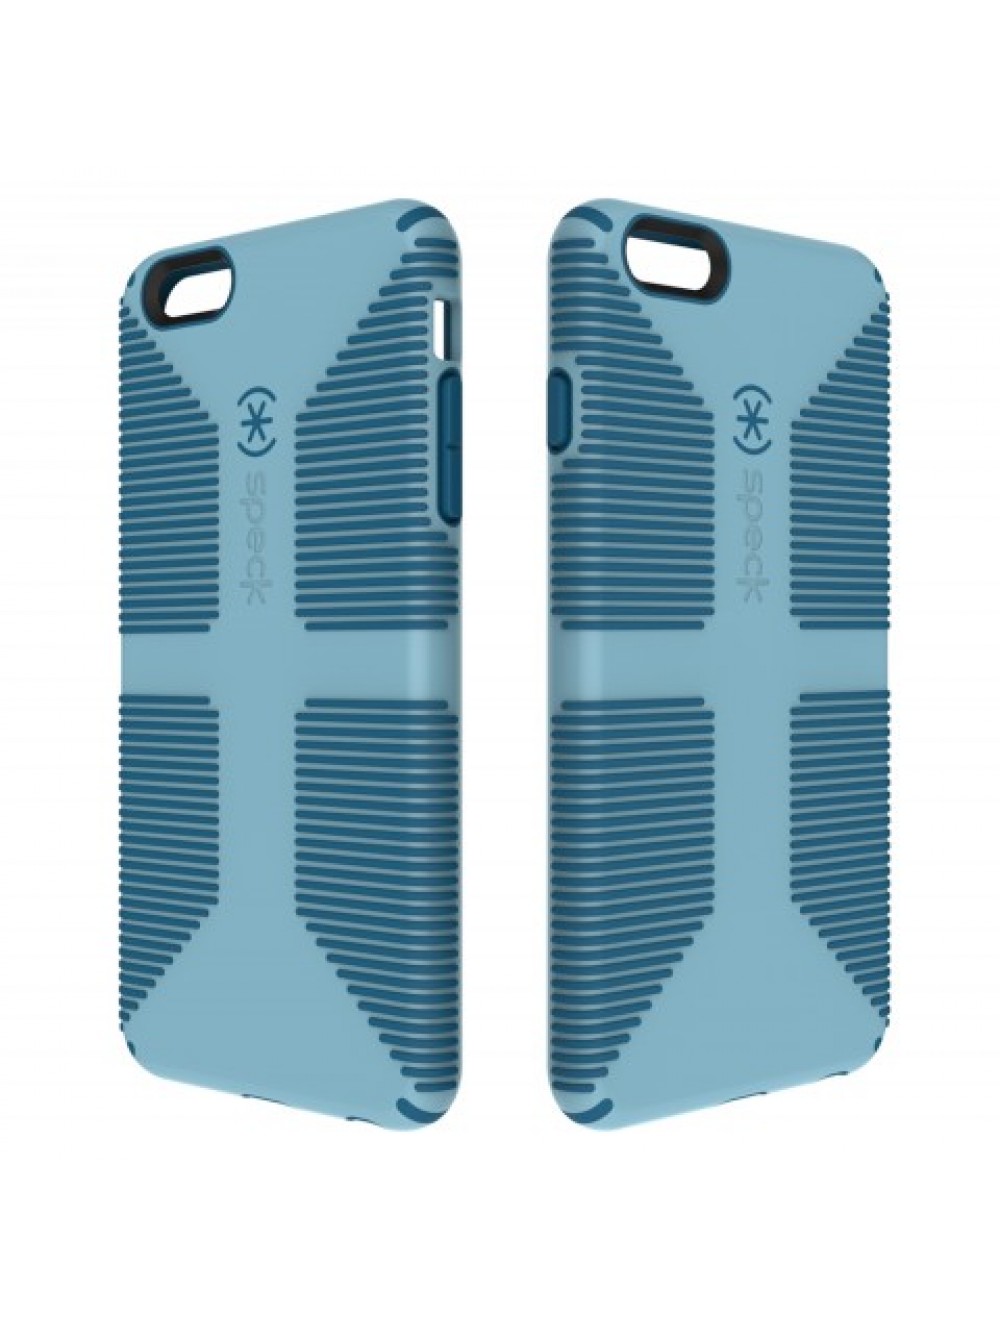 Speck Candy shell Grip Iphone 6 - River Blue/Tahoe Blue